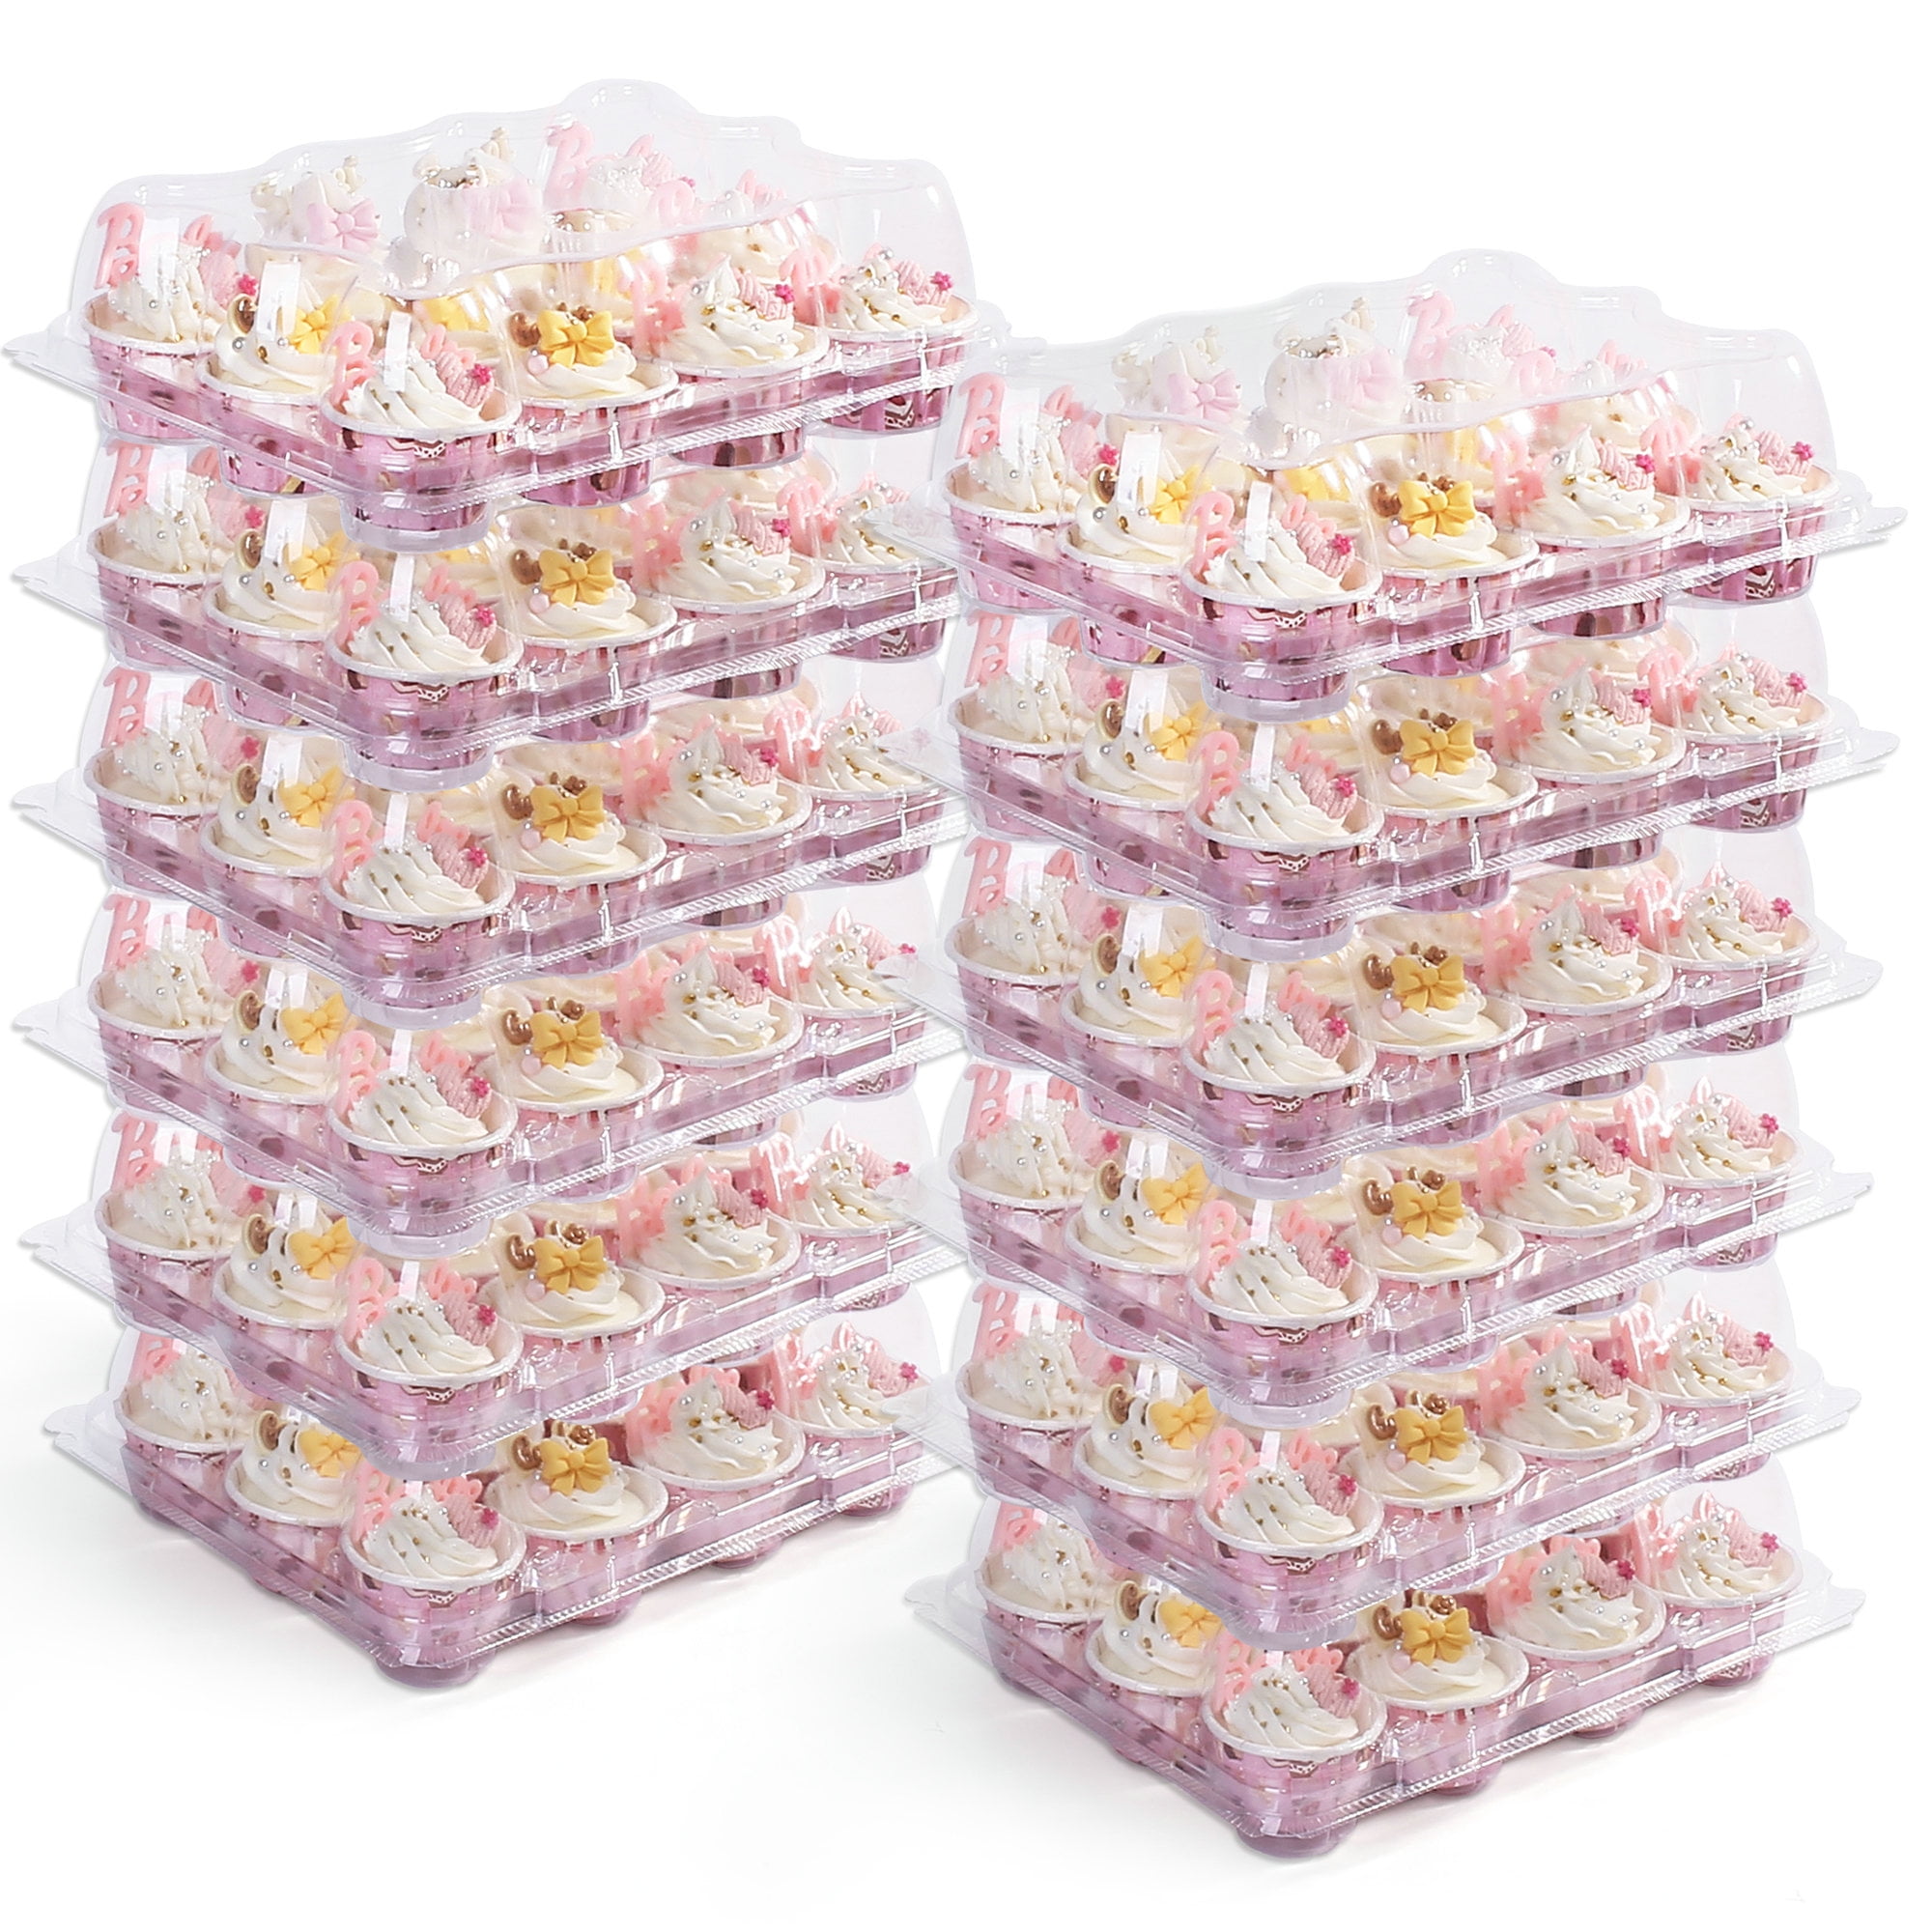 LotFancy Plastic Individual Cupcake Containers, 100 Pcs Clear